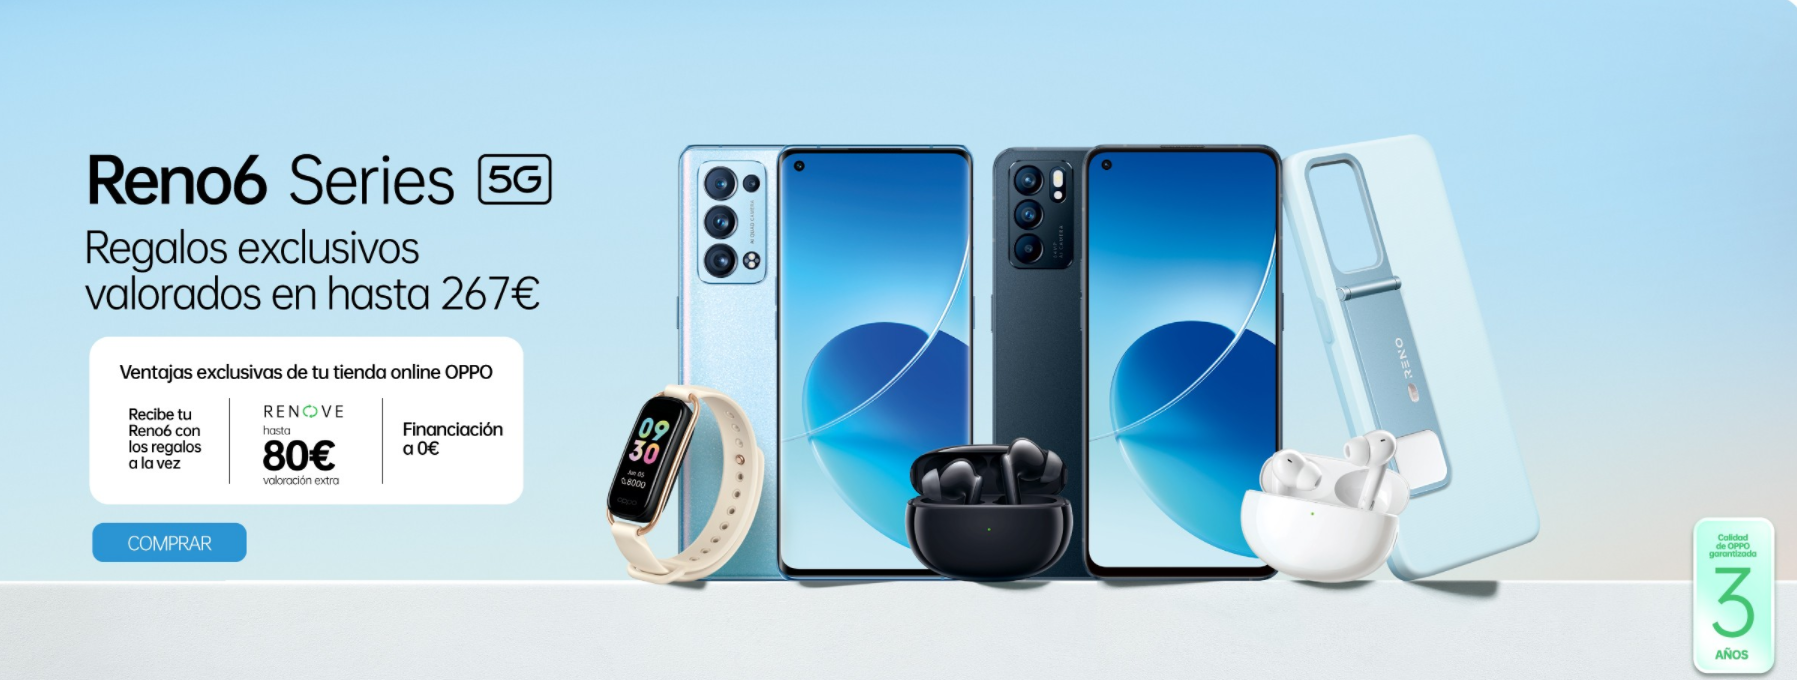 OPPO Reno 6 5G and Reno 6 Pro 5G go on sale in Europe priced from €499 with gifts up to €267